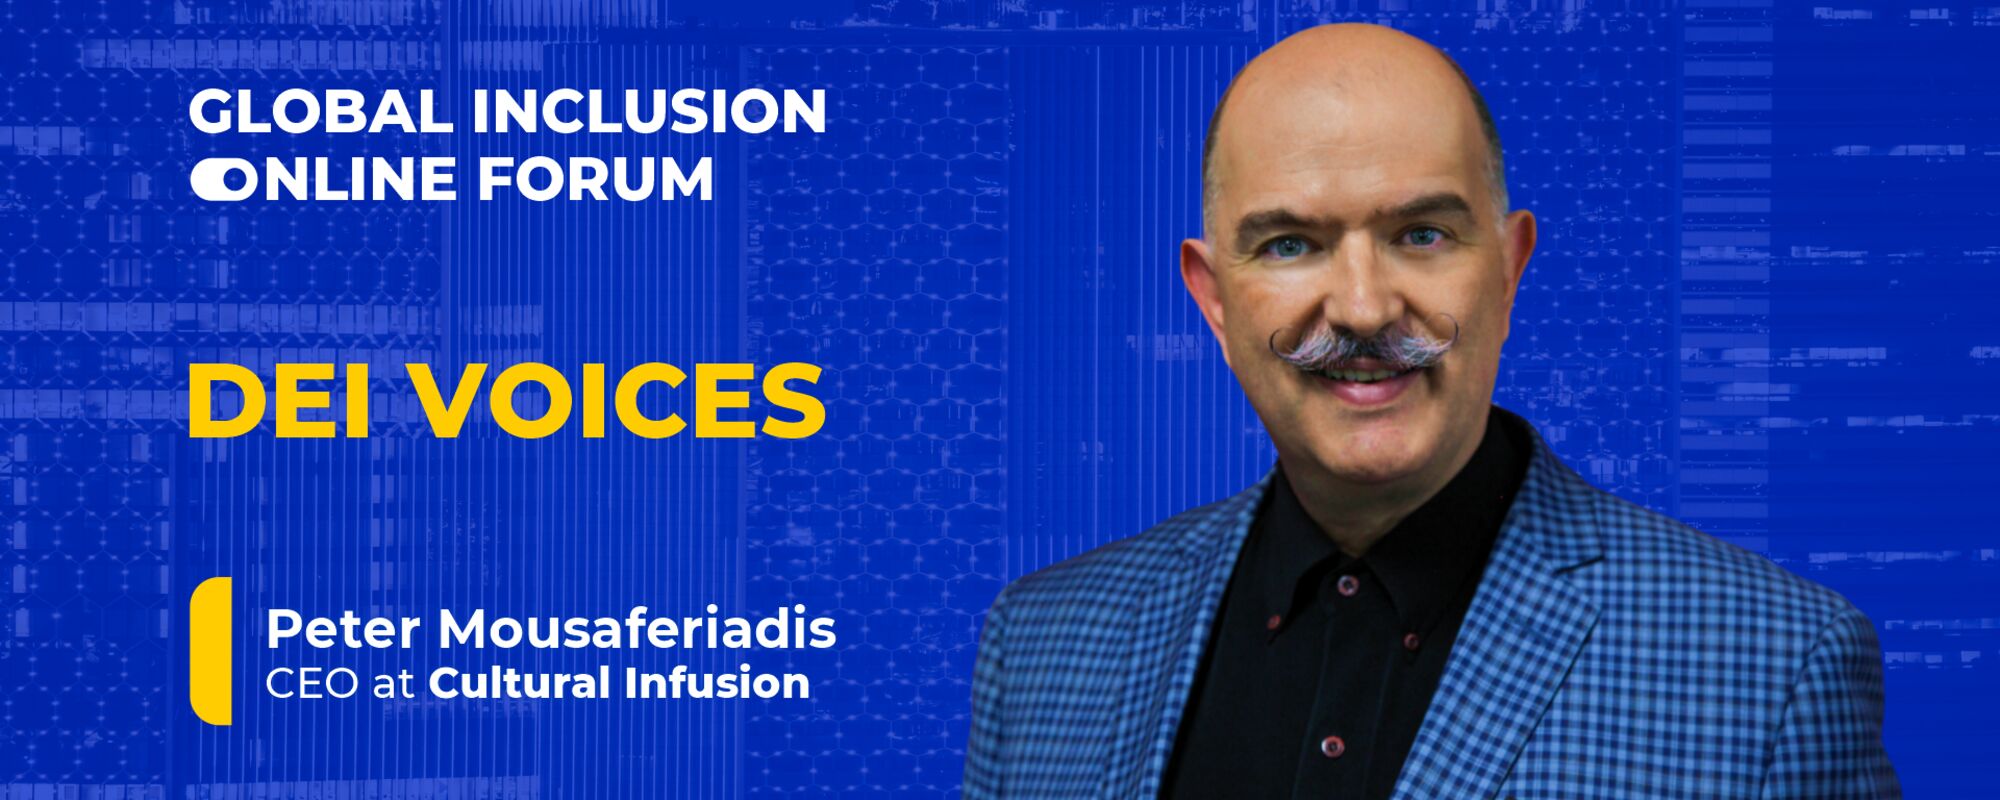 DEI Voices: Peter Mousaferiadis - CEO & Founder at Cultural Infusion